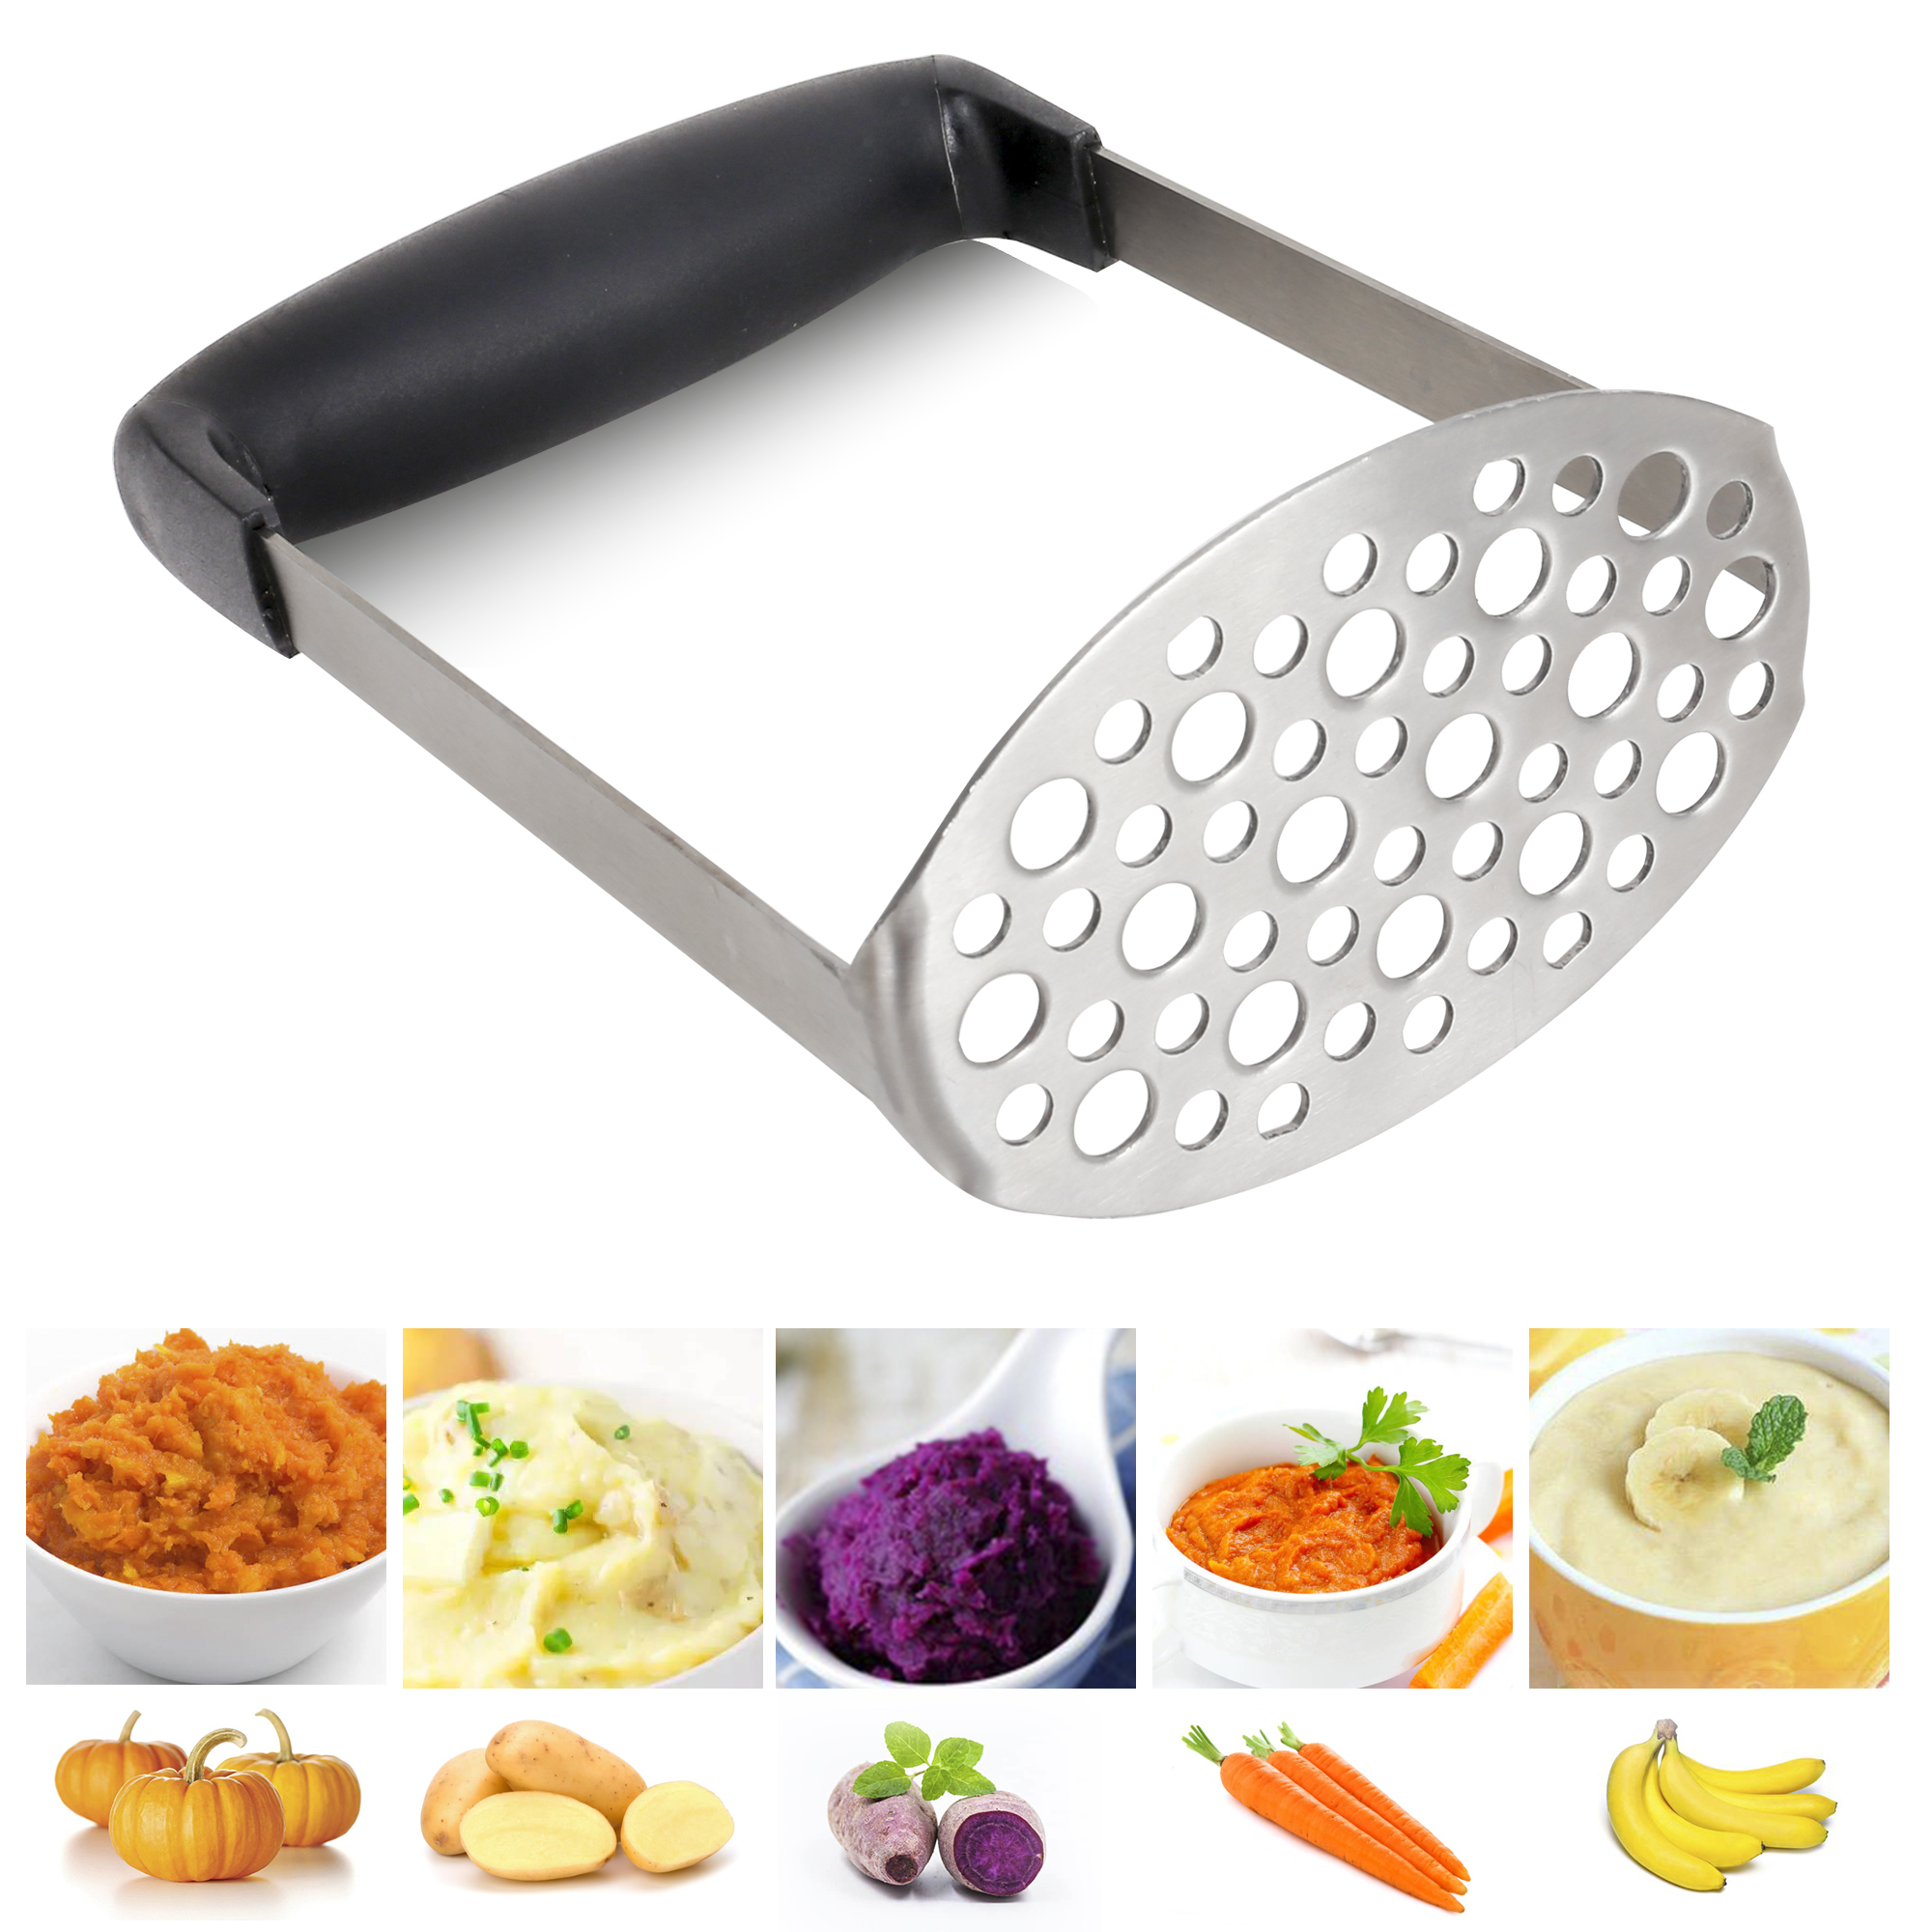 Stainless Steel Potato Masher - Ergonomic Design Sturdy Construction Long&comfortable Grip - Manual Masher by Meaartem